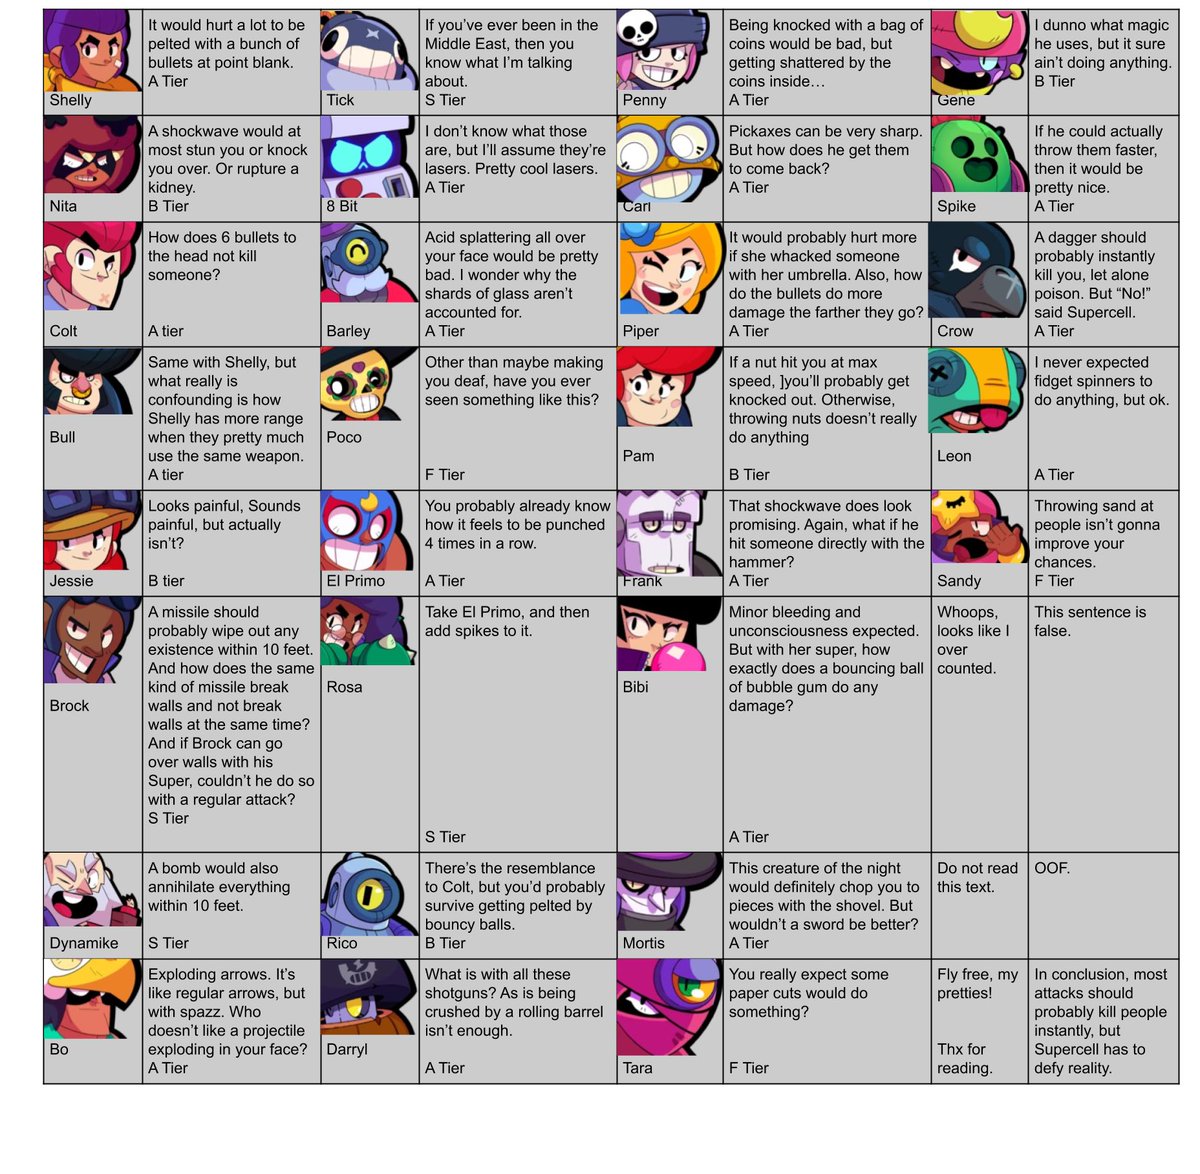 Code Ashbs On Twitter Tier List Of How Lethal Every Brawler S Attack Are Funny How Brock Has One Of The Deadliest Attacks But Does Little Damage In Comparison Https T Co W0mqsiqn7e Brawlstars Https T Co Ykv2hfrlo7